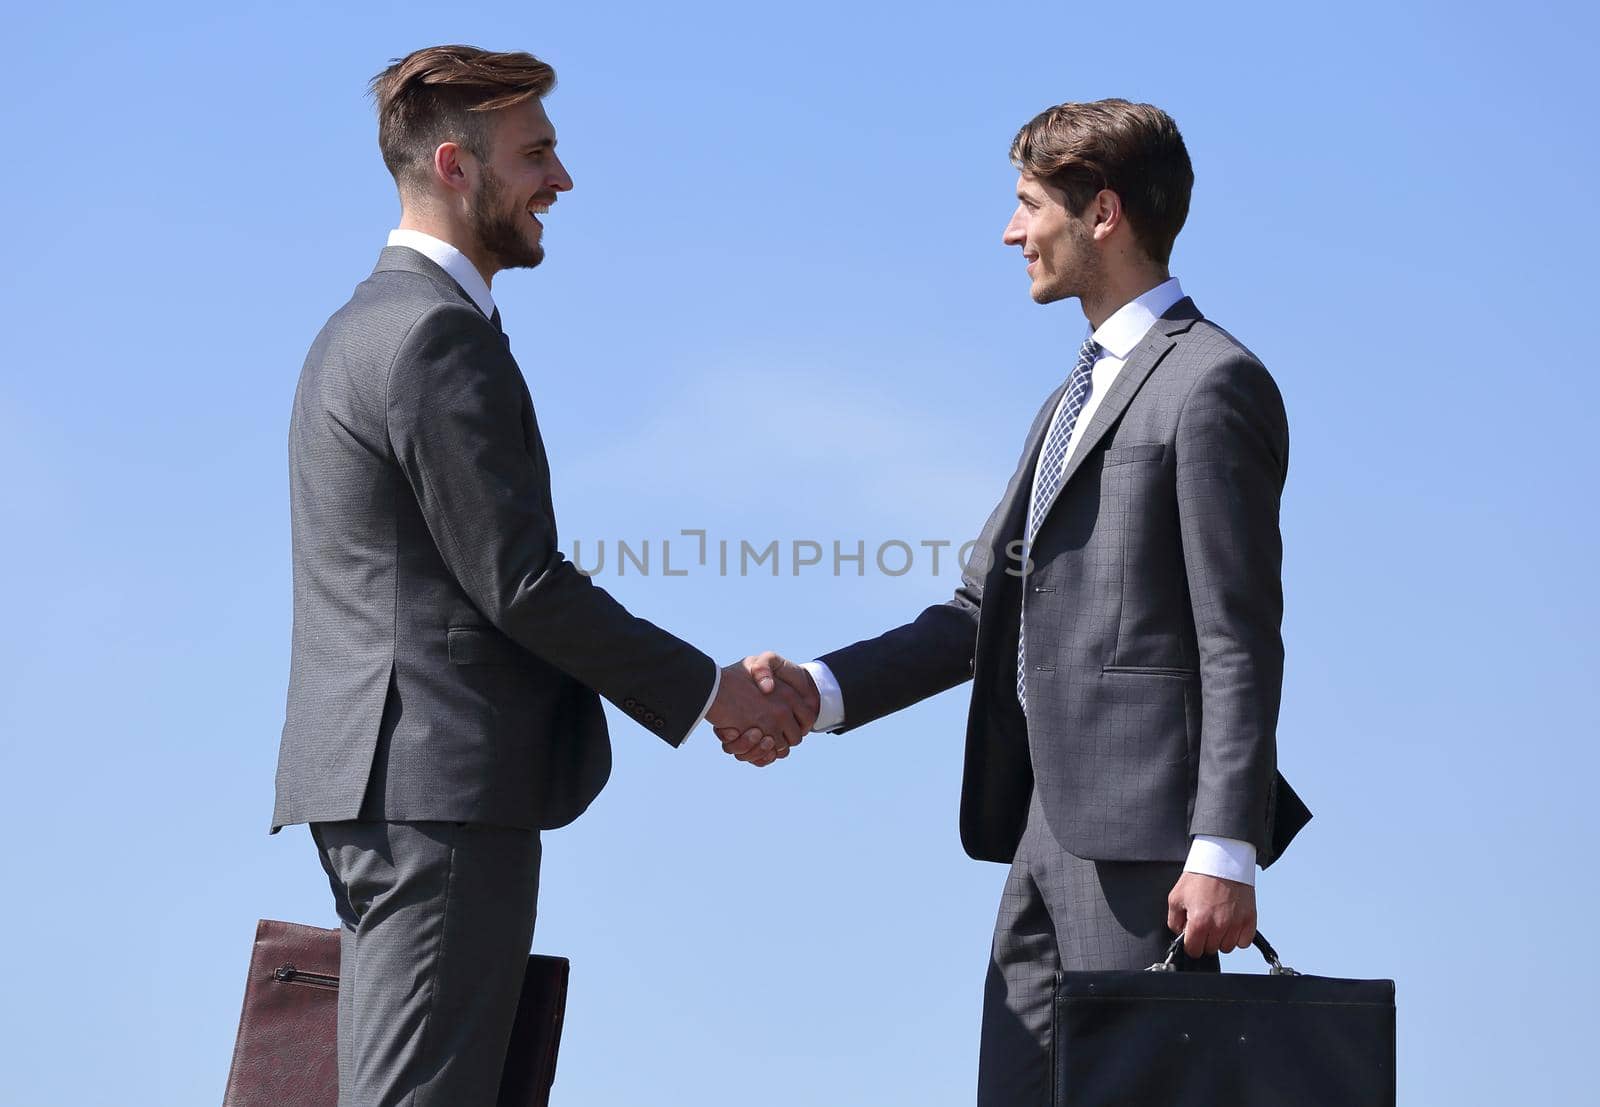 business colleagues shaking hands with each other.photo with copy space